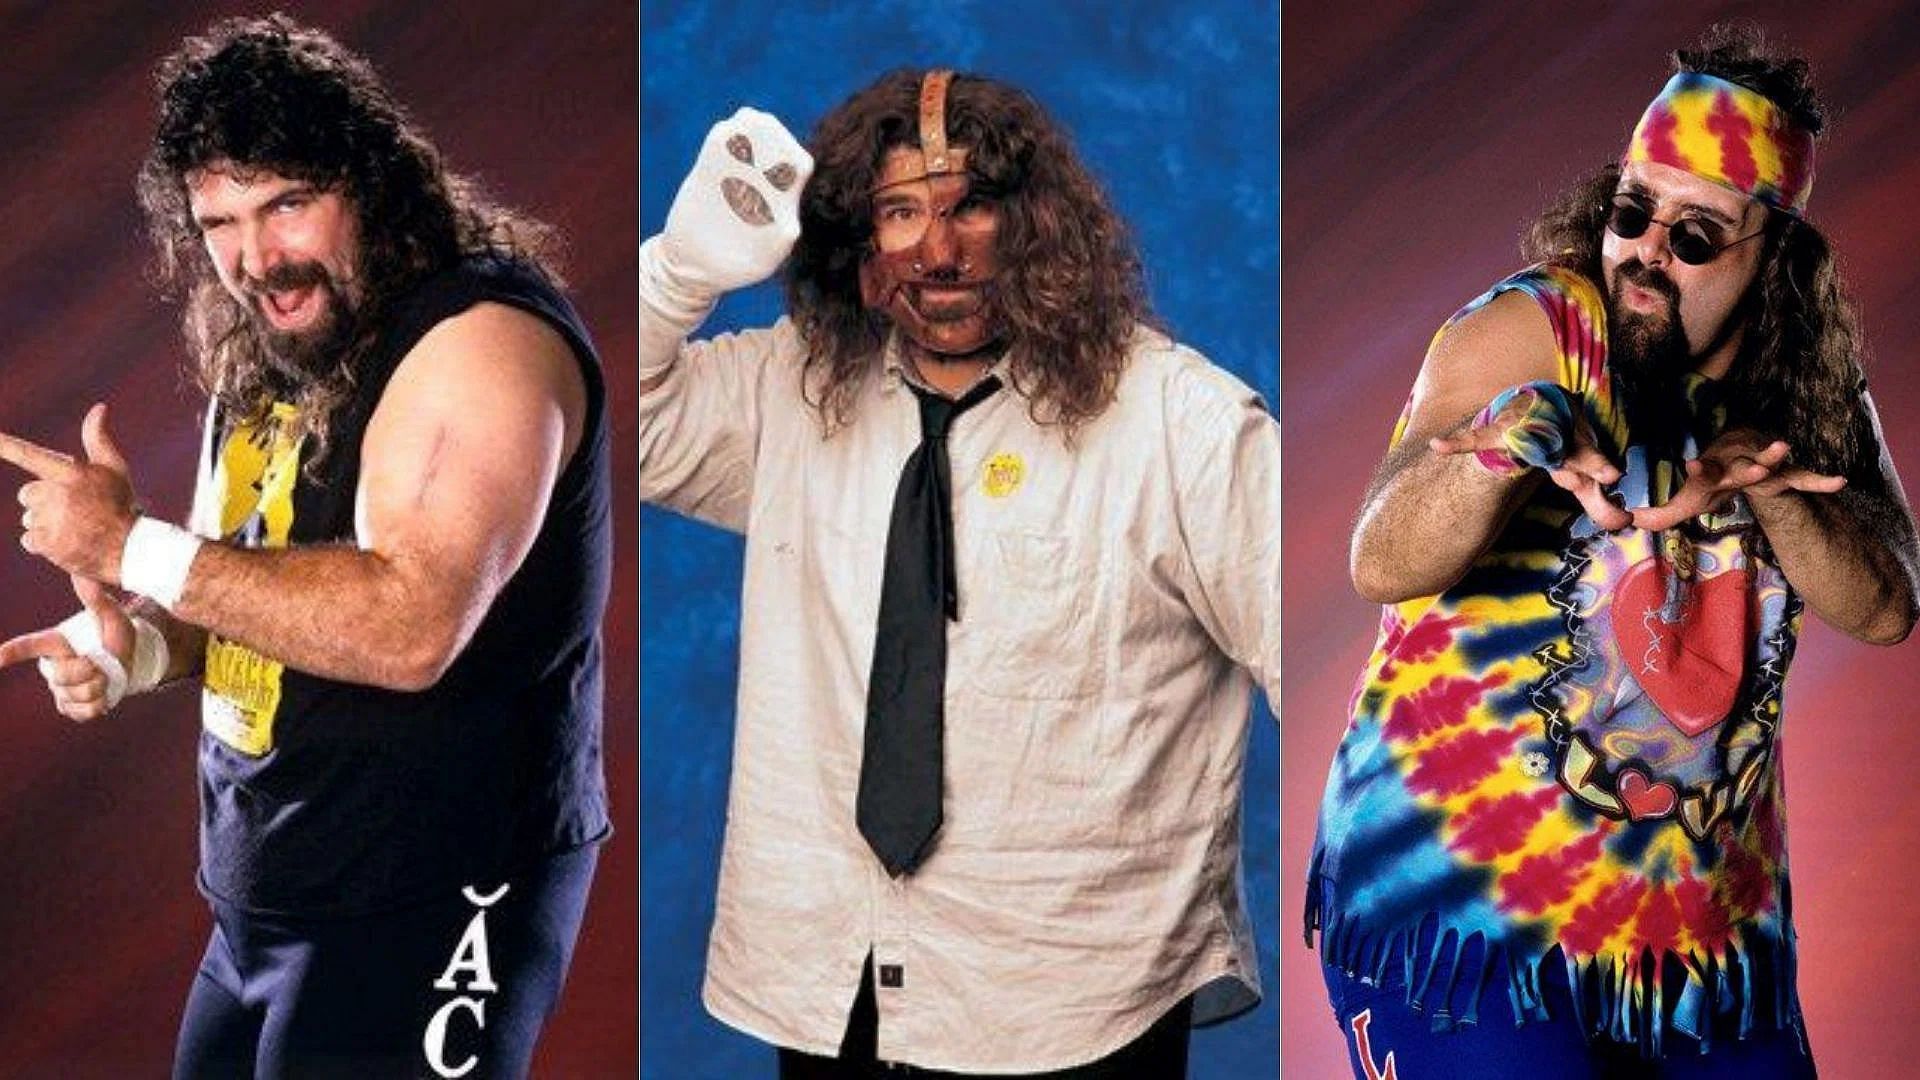 All three faces of Mick Foley participated in The Royal Rumble